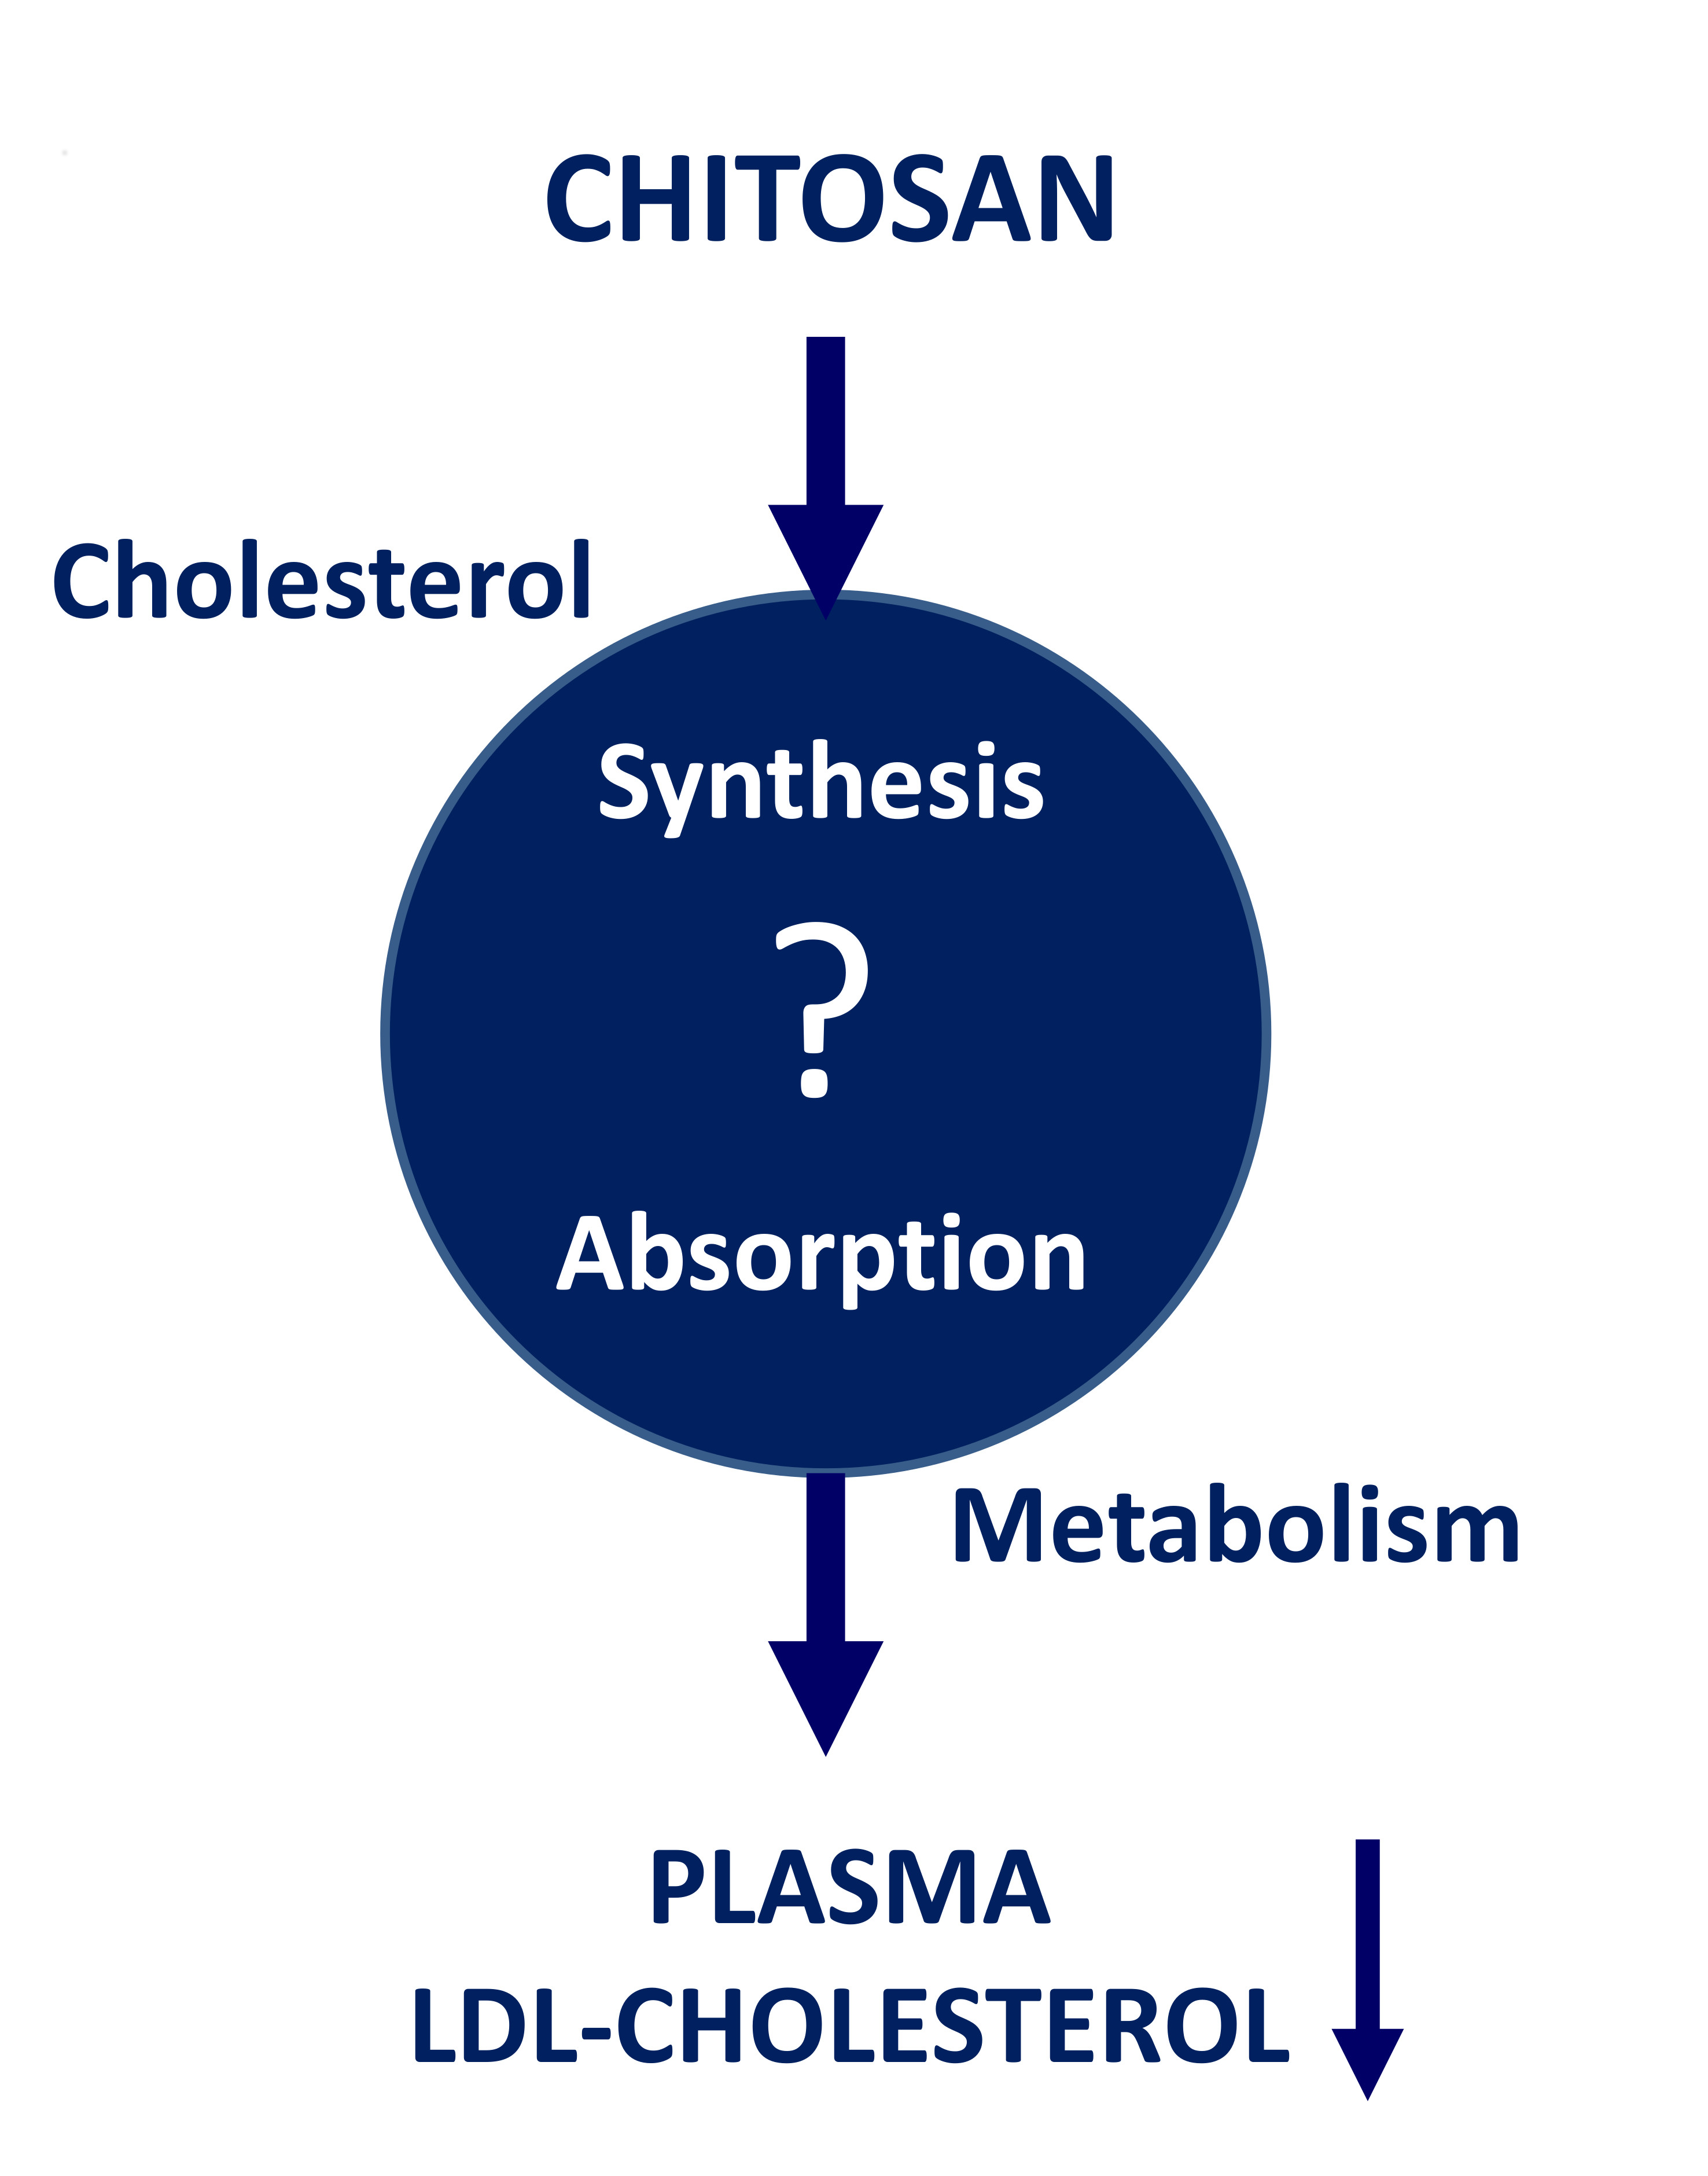 Chitosan for metabolism